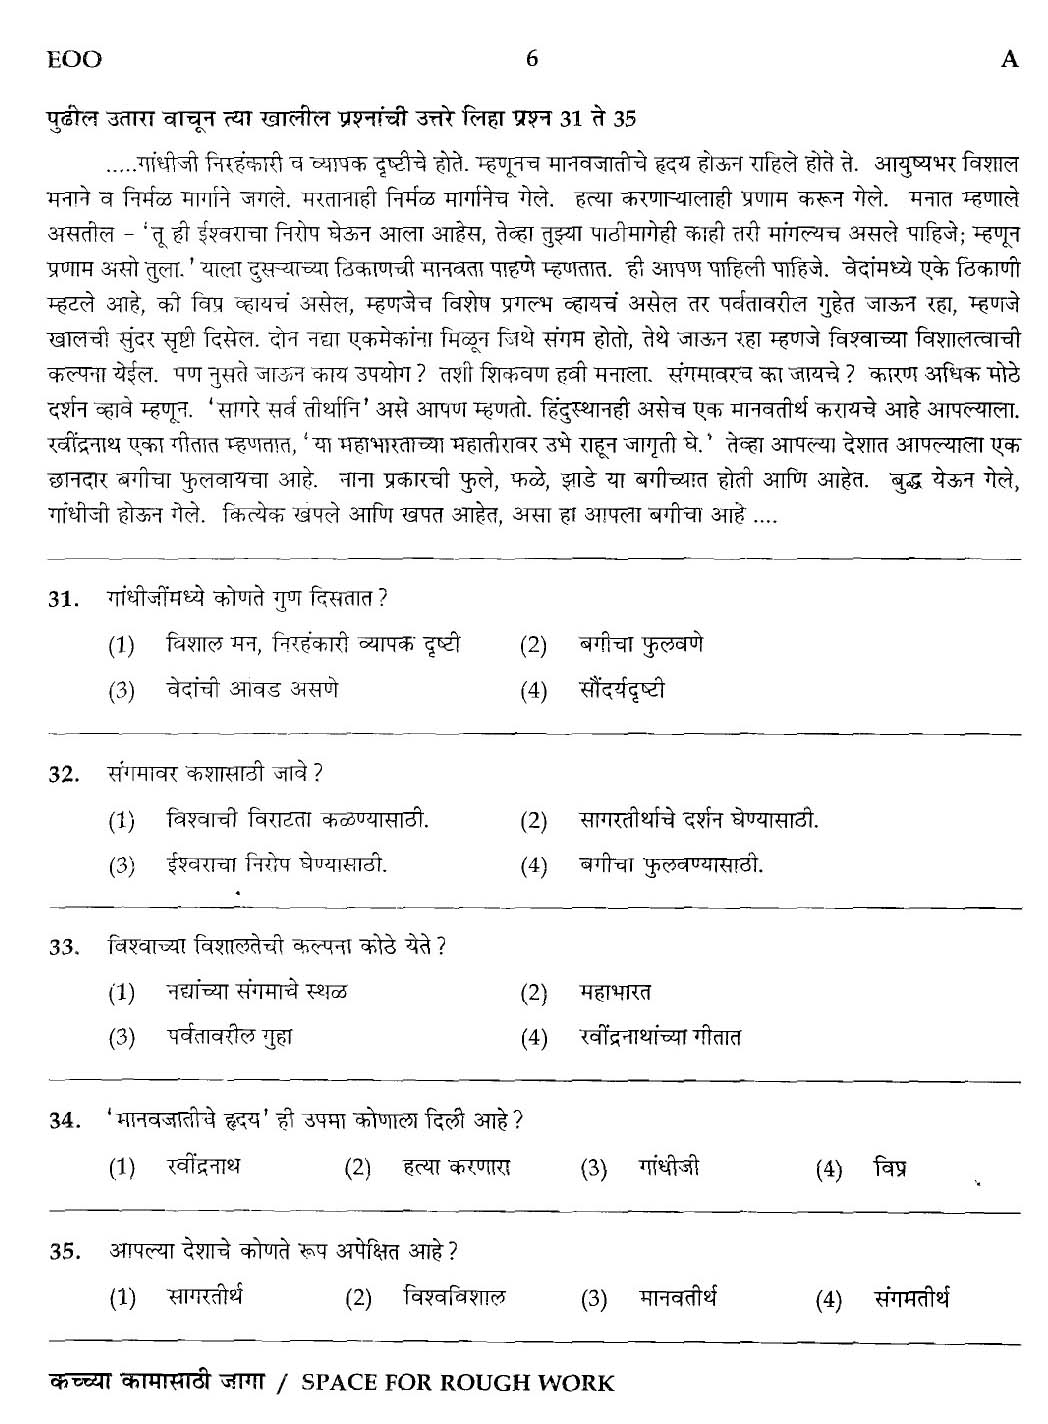 MPSC Agricultural Services Preliminary Exam 2012 Question Paper 5